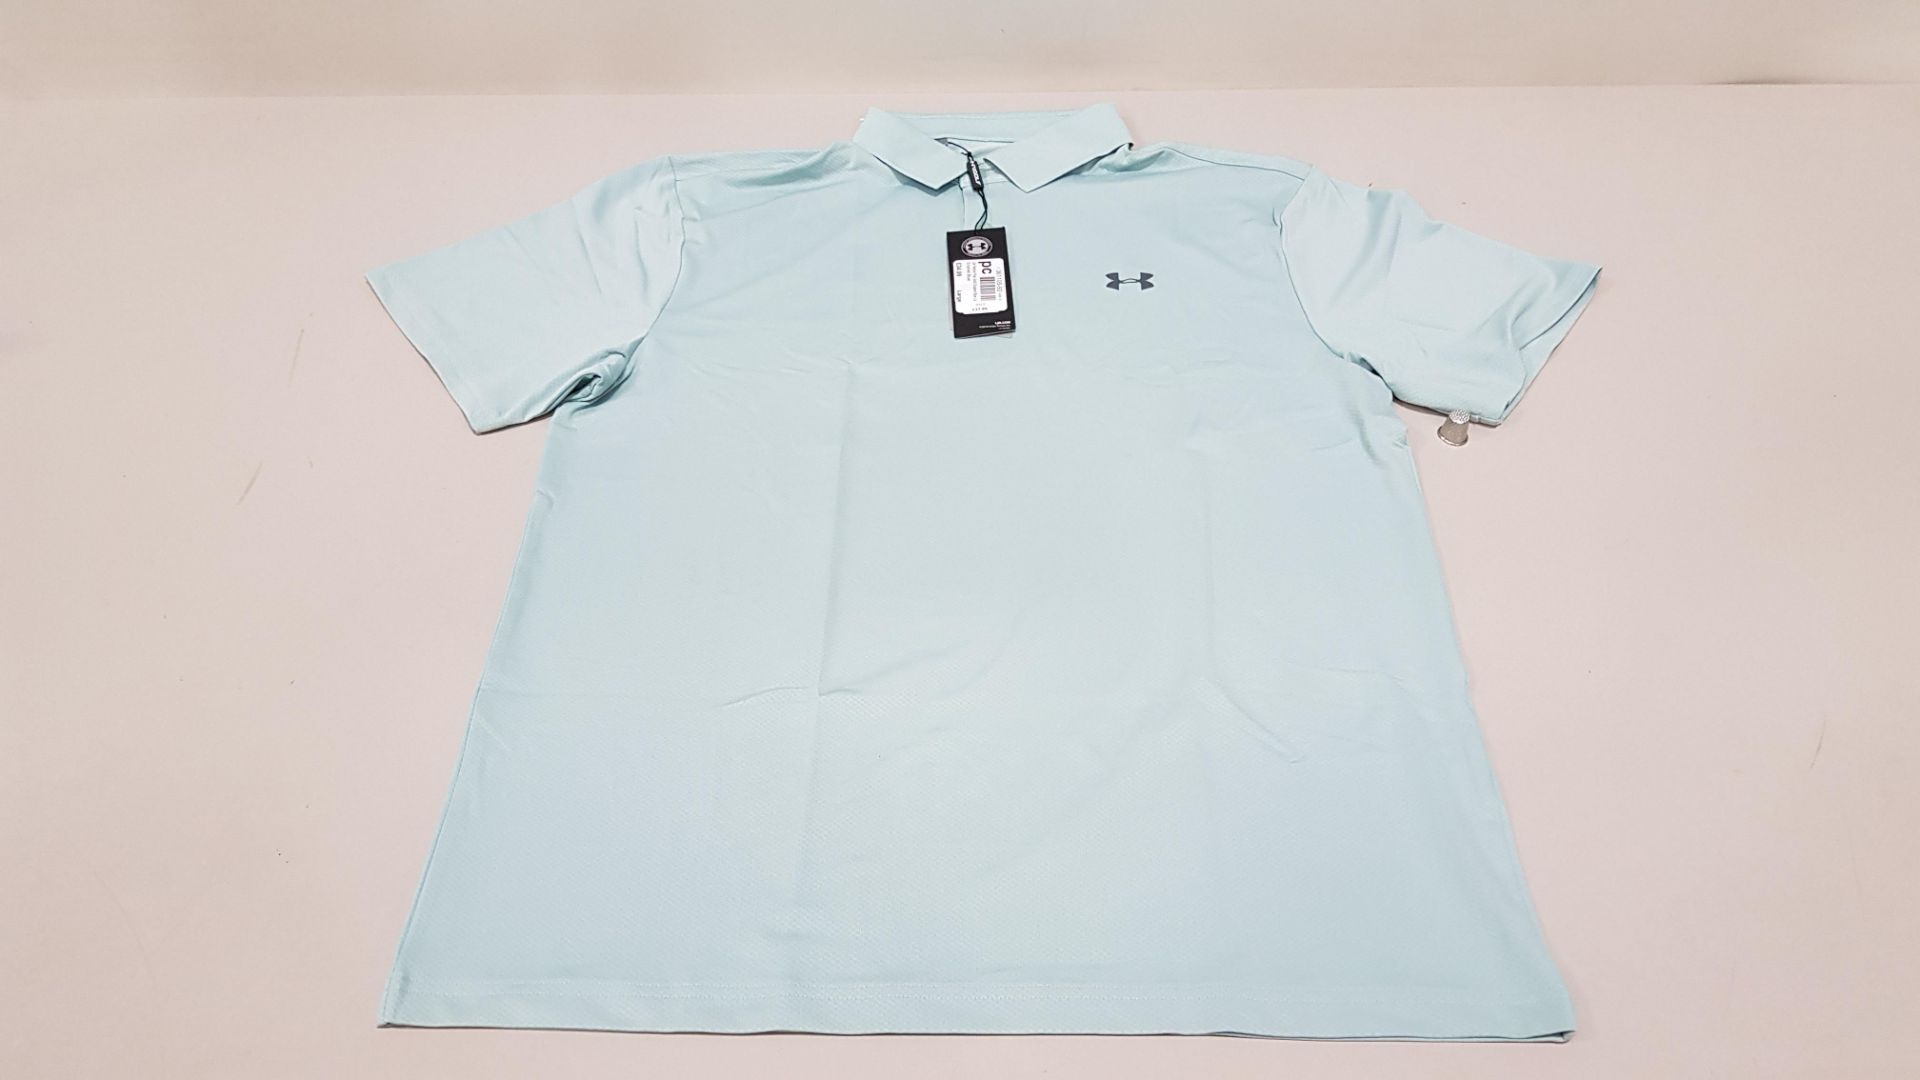 15 X BRAND NEW UNDER ARMOUR BAGGED PERFORMANCE POLO IN ENAMEL BLUE SIZE LARGE RRP £34.99 (TOTAL